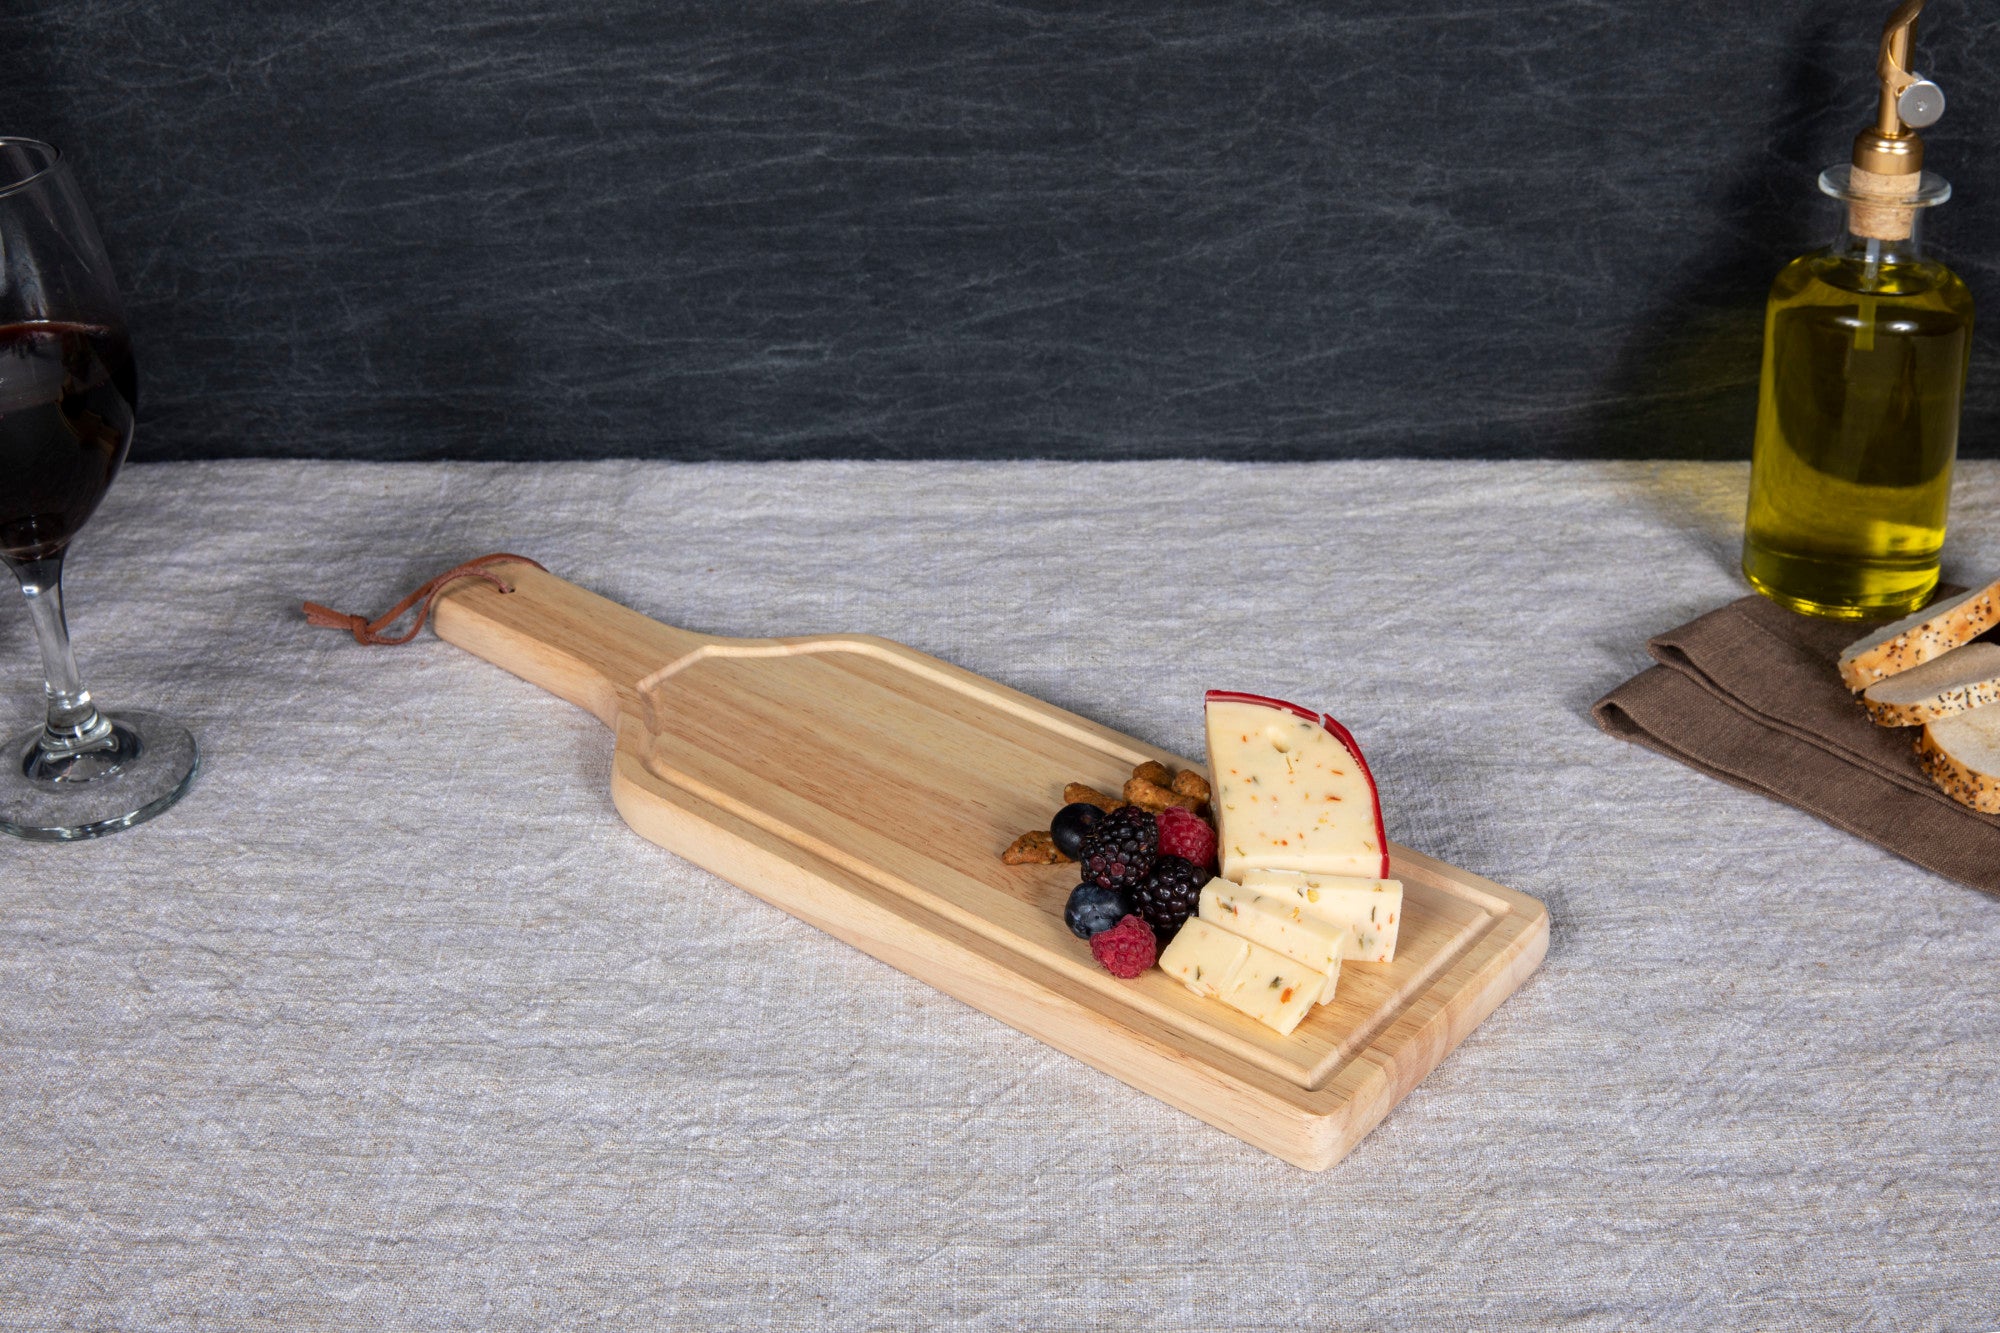 Texas Rangers - Botella Cheese Cutting Board & Serving Tray